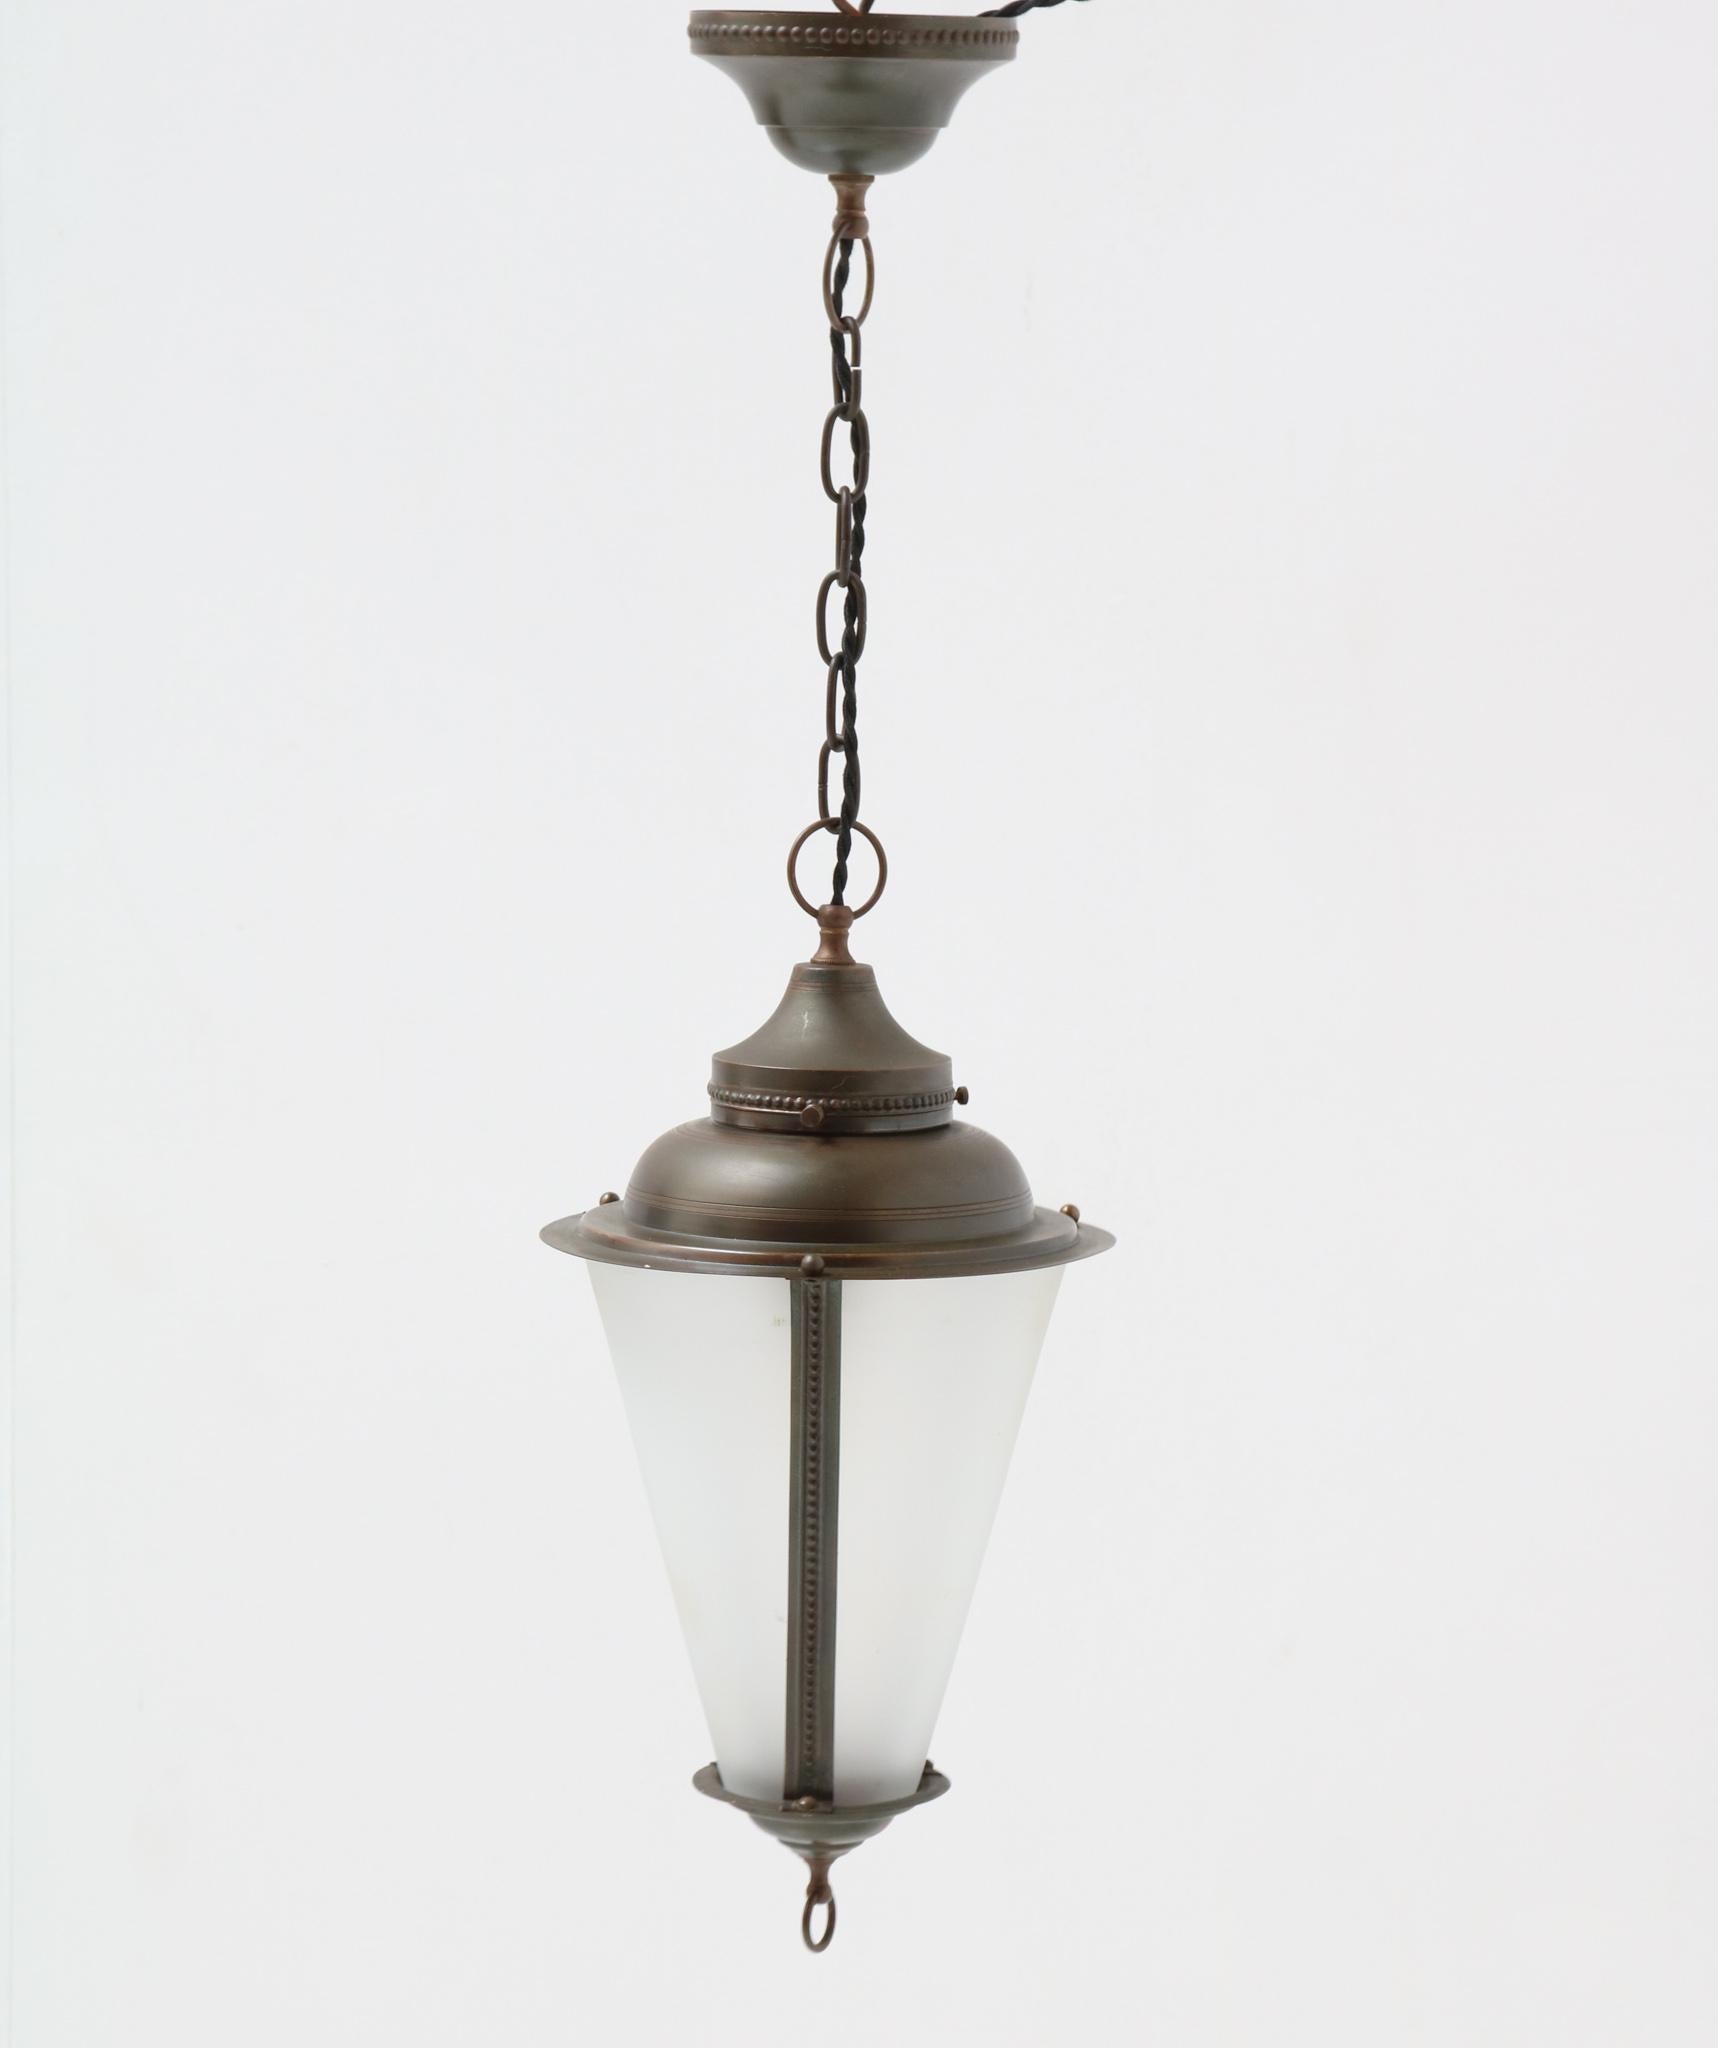 Stunning Art Nouveau lantern.
Striking Dutch design from the 1900s.
Patinated brass frame with original etched glass shade.
Rewired with one original socket for E-27 light bulb.
This wonderful Art Nouveau lantern is in good original condition